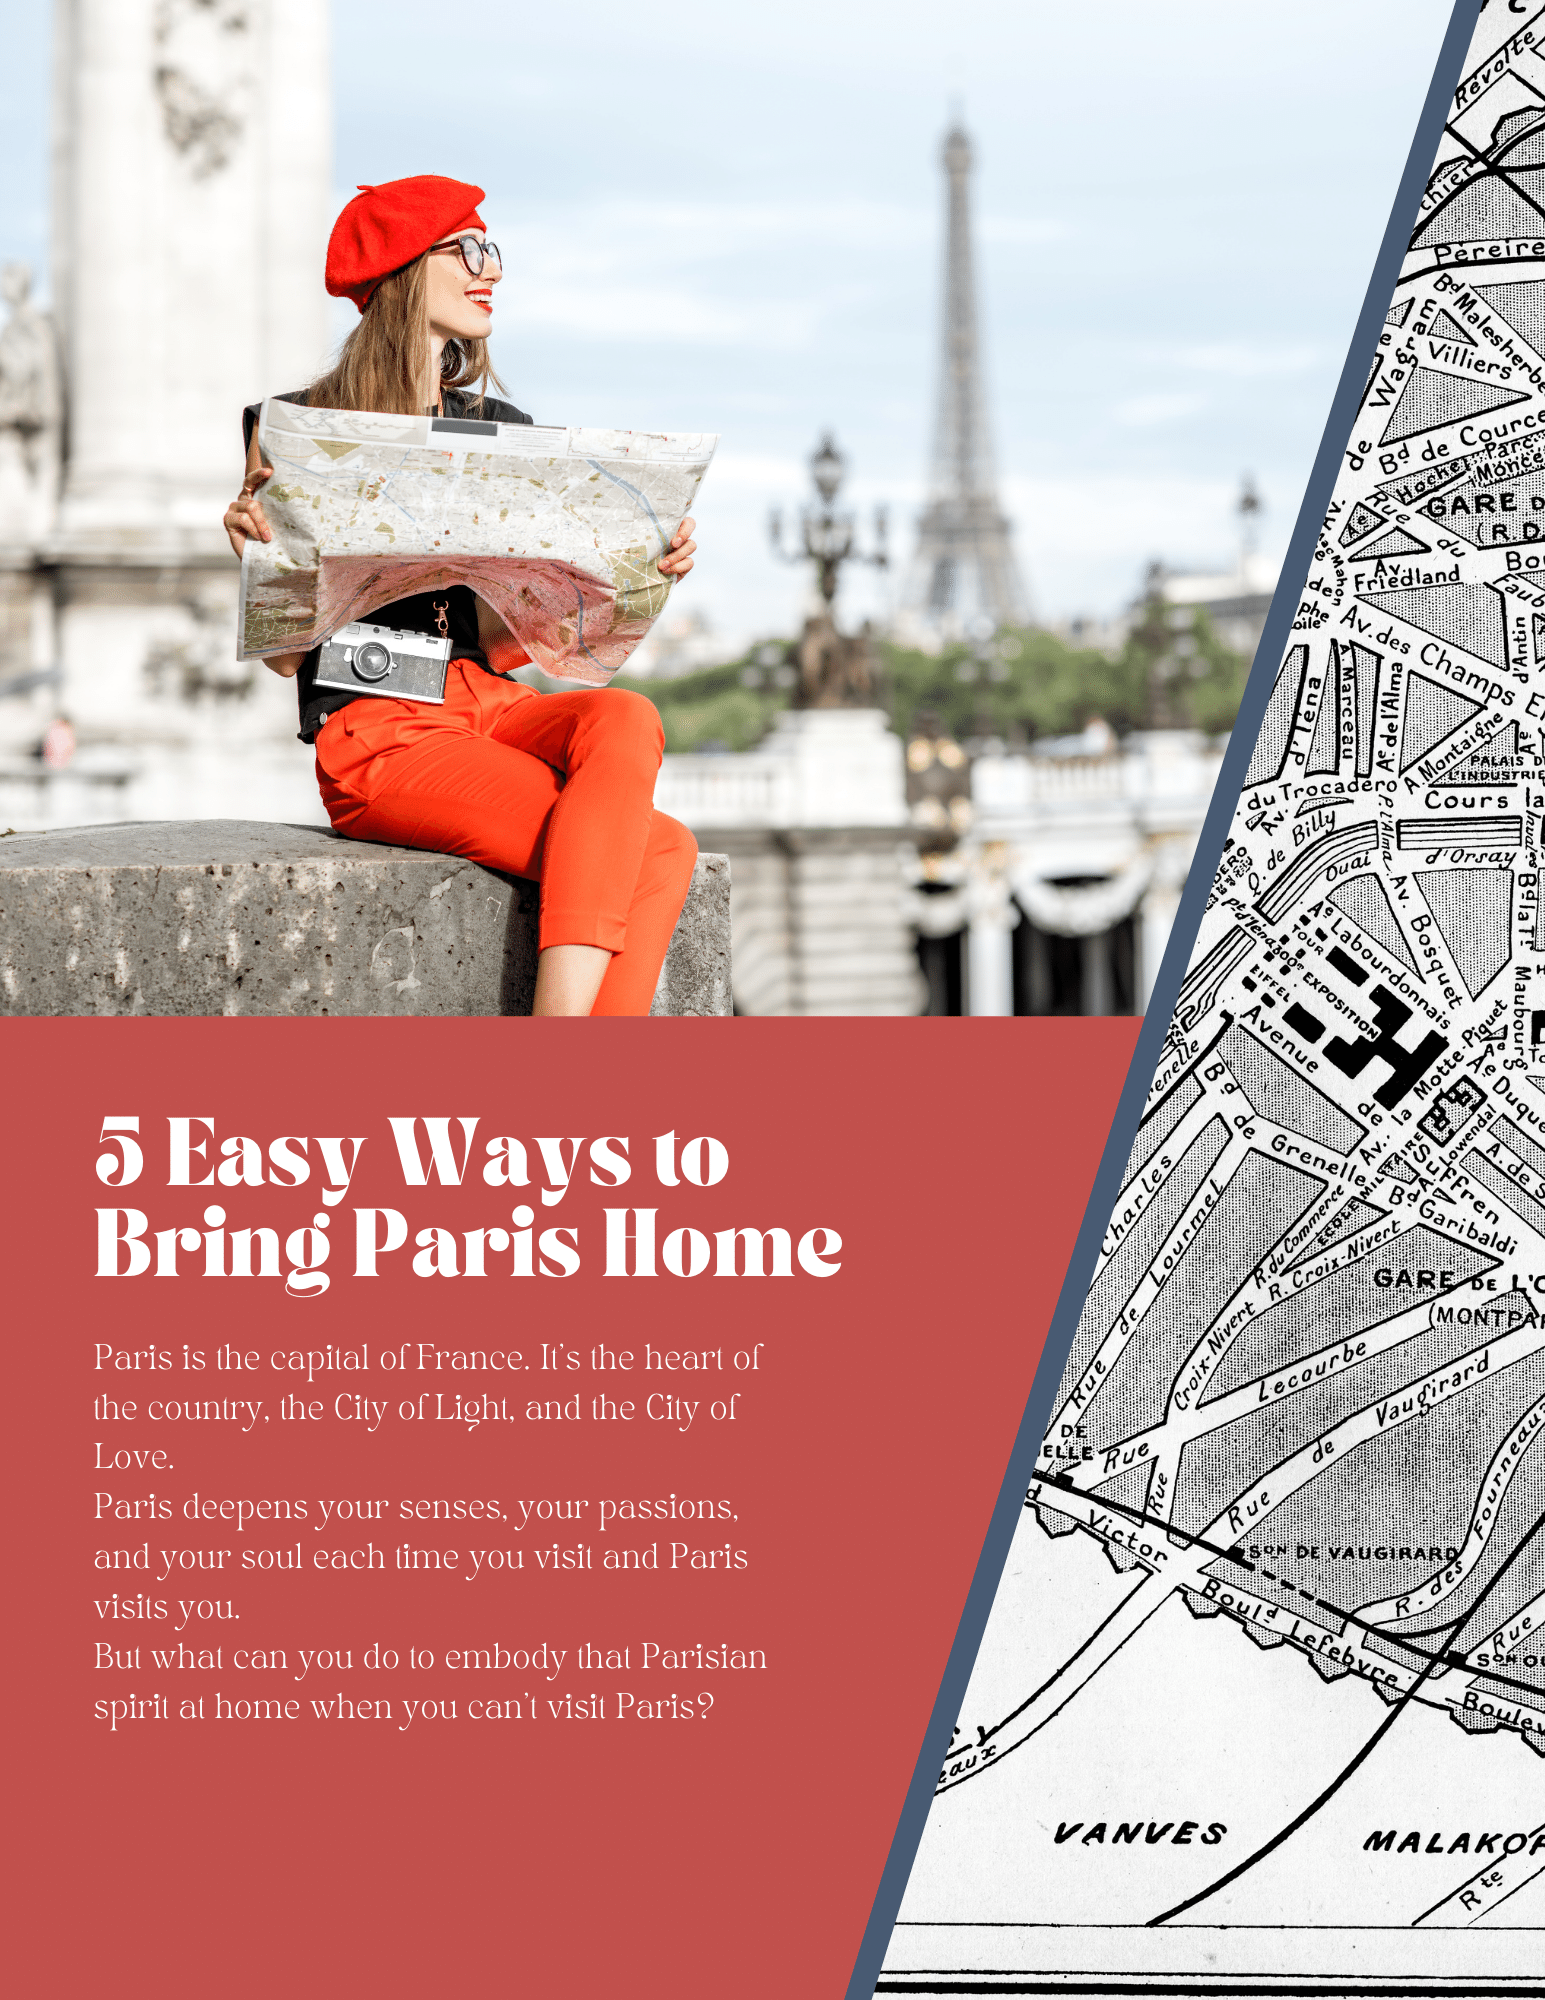 5 Easy Ways to Bring Paris Home Ebook, photo of woman with a map and the Eiffel Tower in Paris